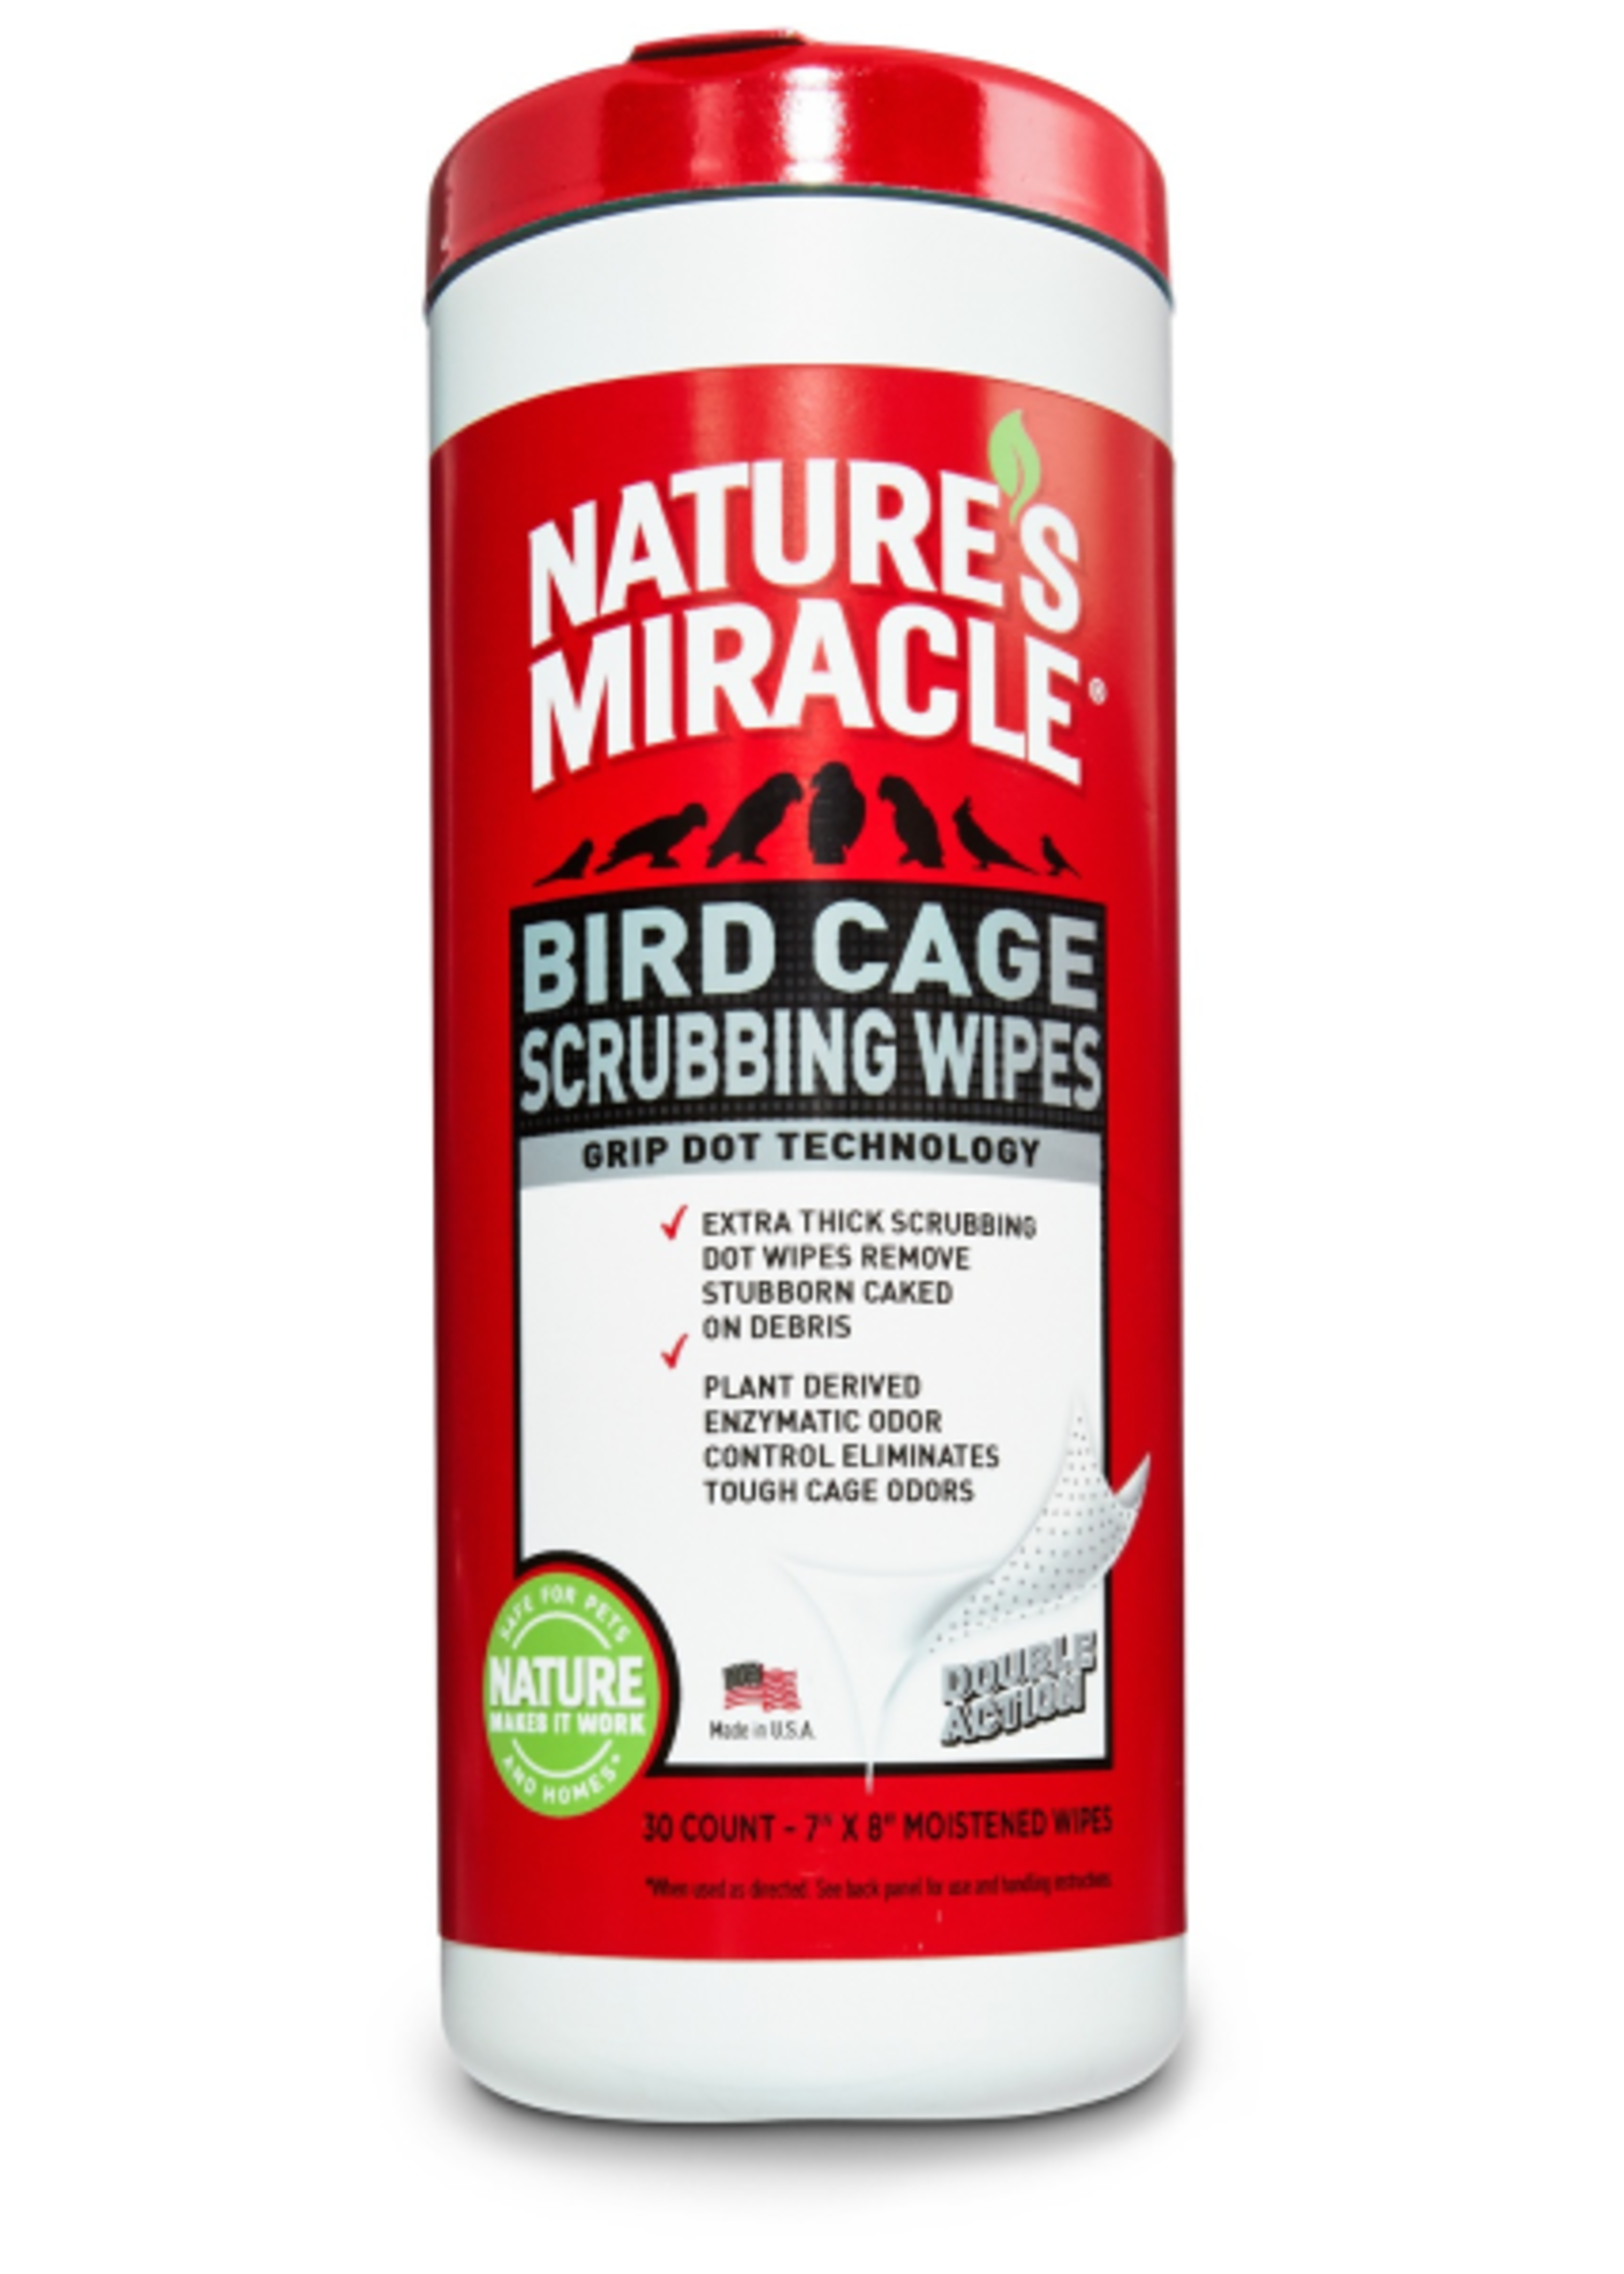 Nature's Miracle Bird Cage Scrubbing Wipes 30 ct